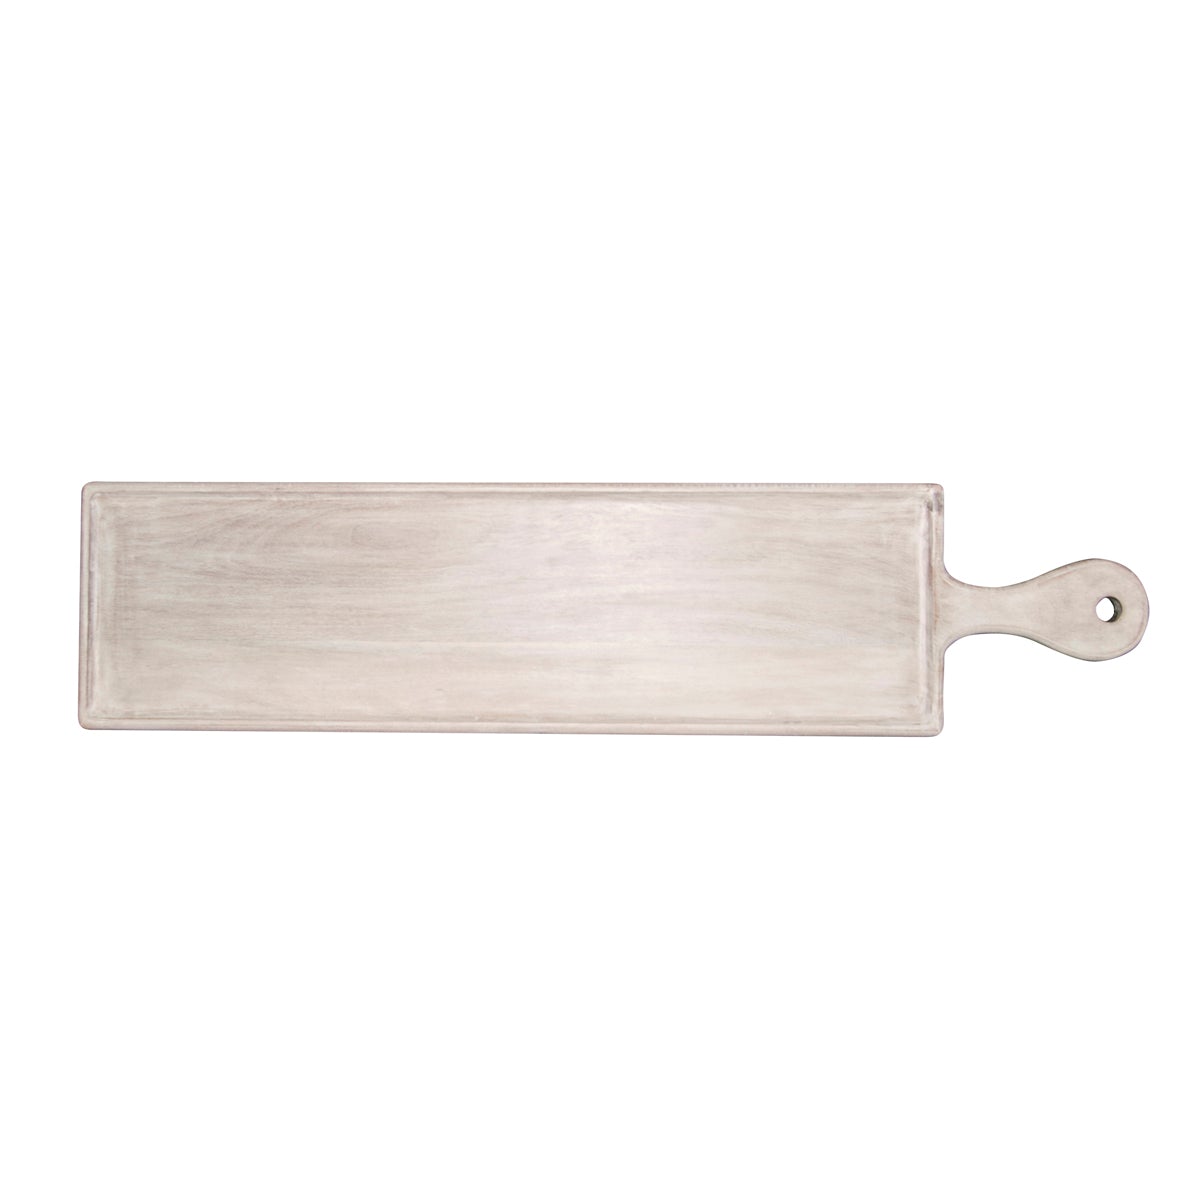 '04838 Chef Inox Mangowood Rectangular Serving Board with Handle White 670x200x20mm Tomkin Australia Hospitality Supplies